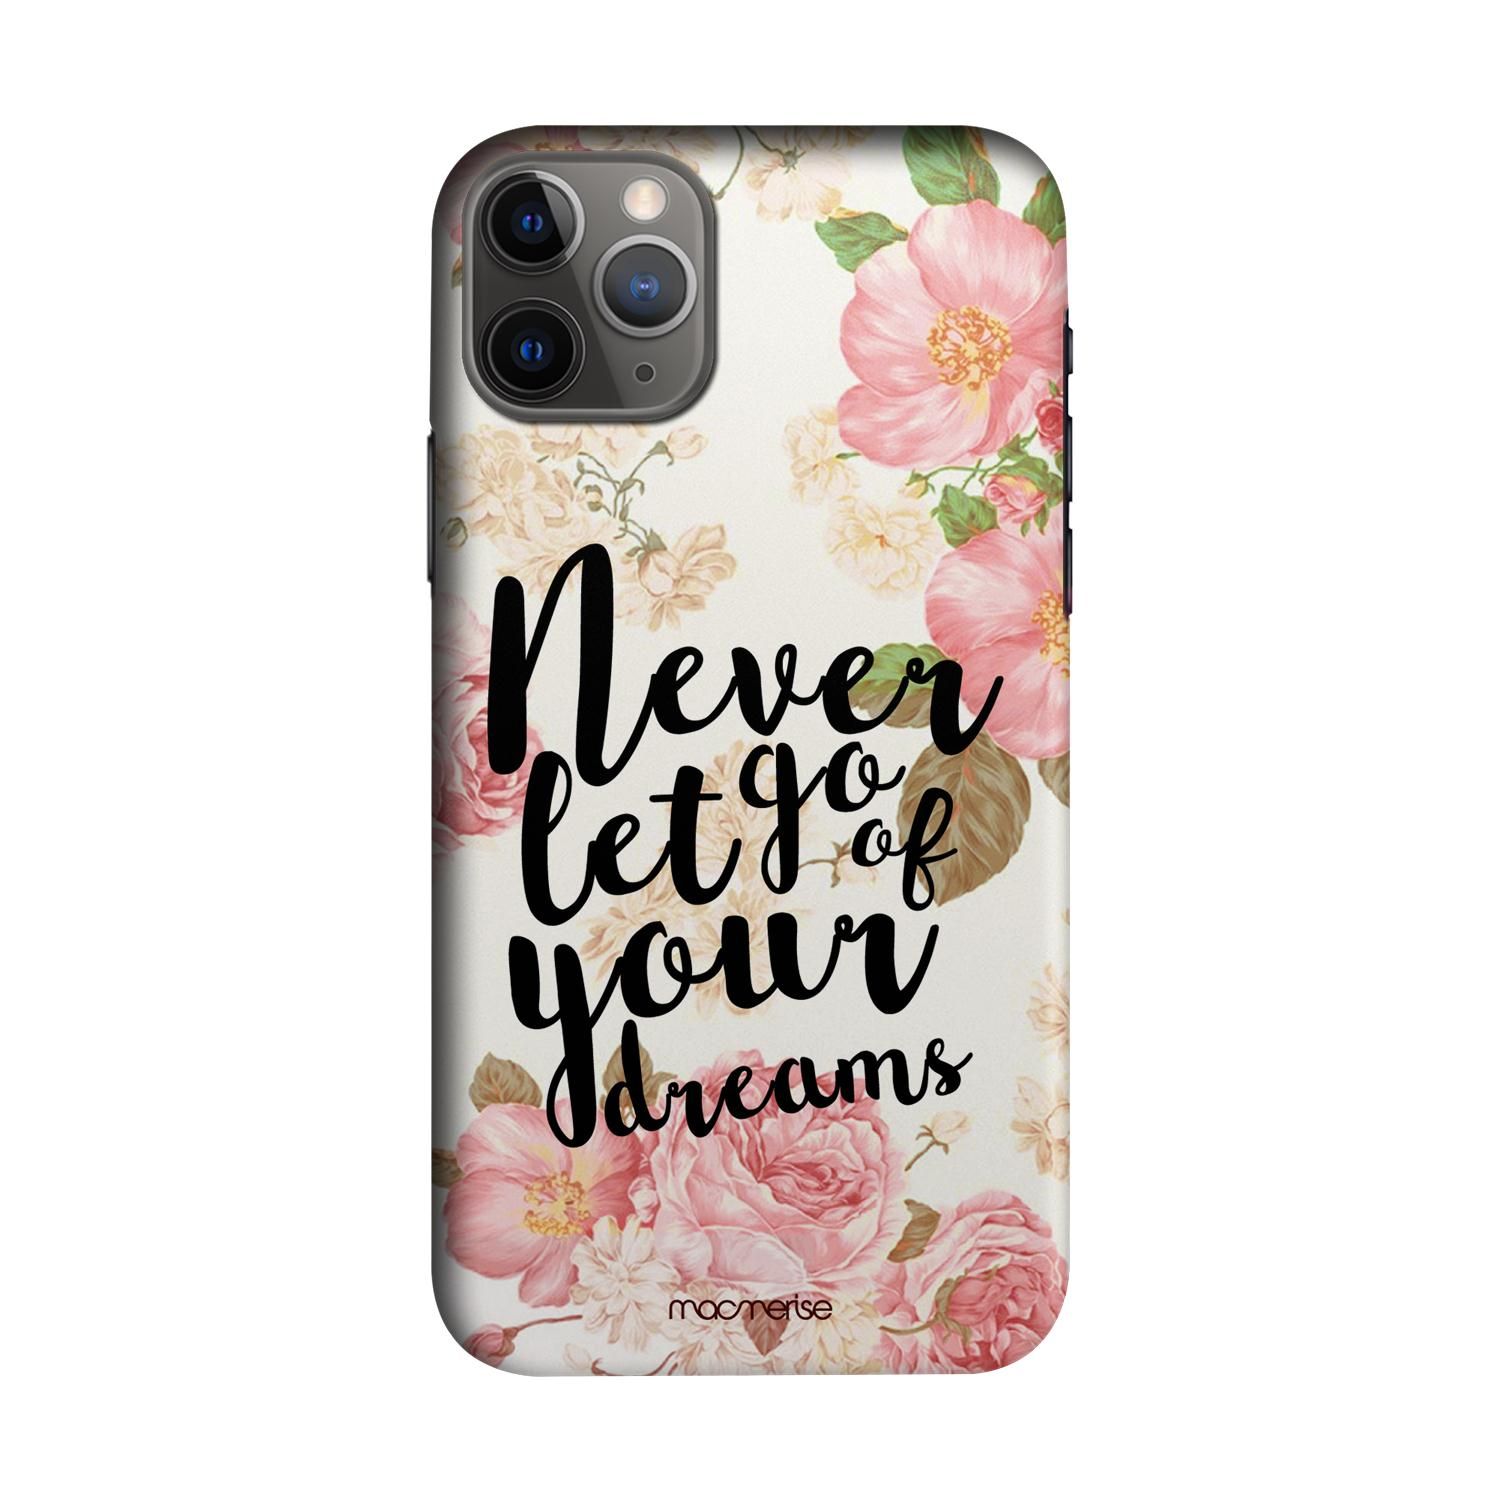 Buy Your Dreams - Sleek Phone Case for iPhone 11 Pro Max Online